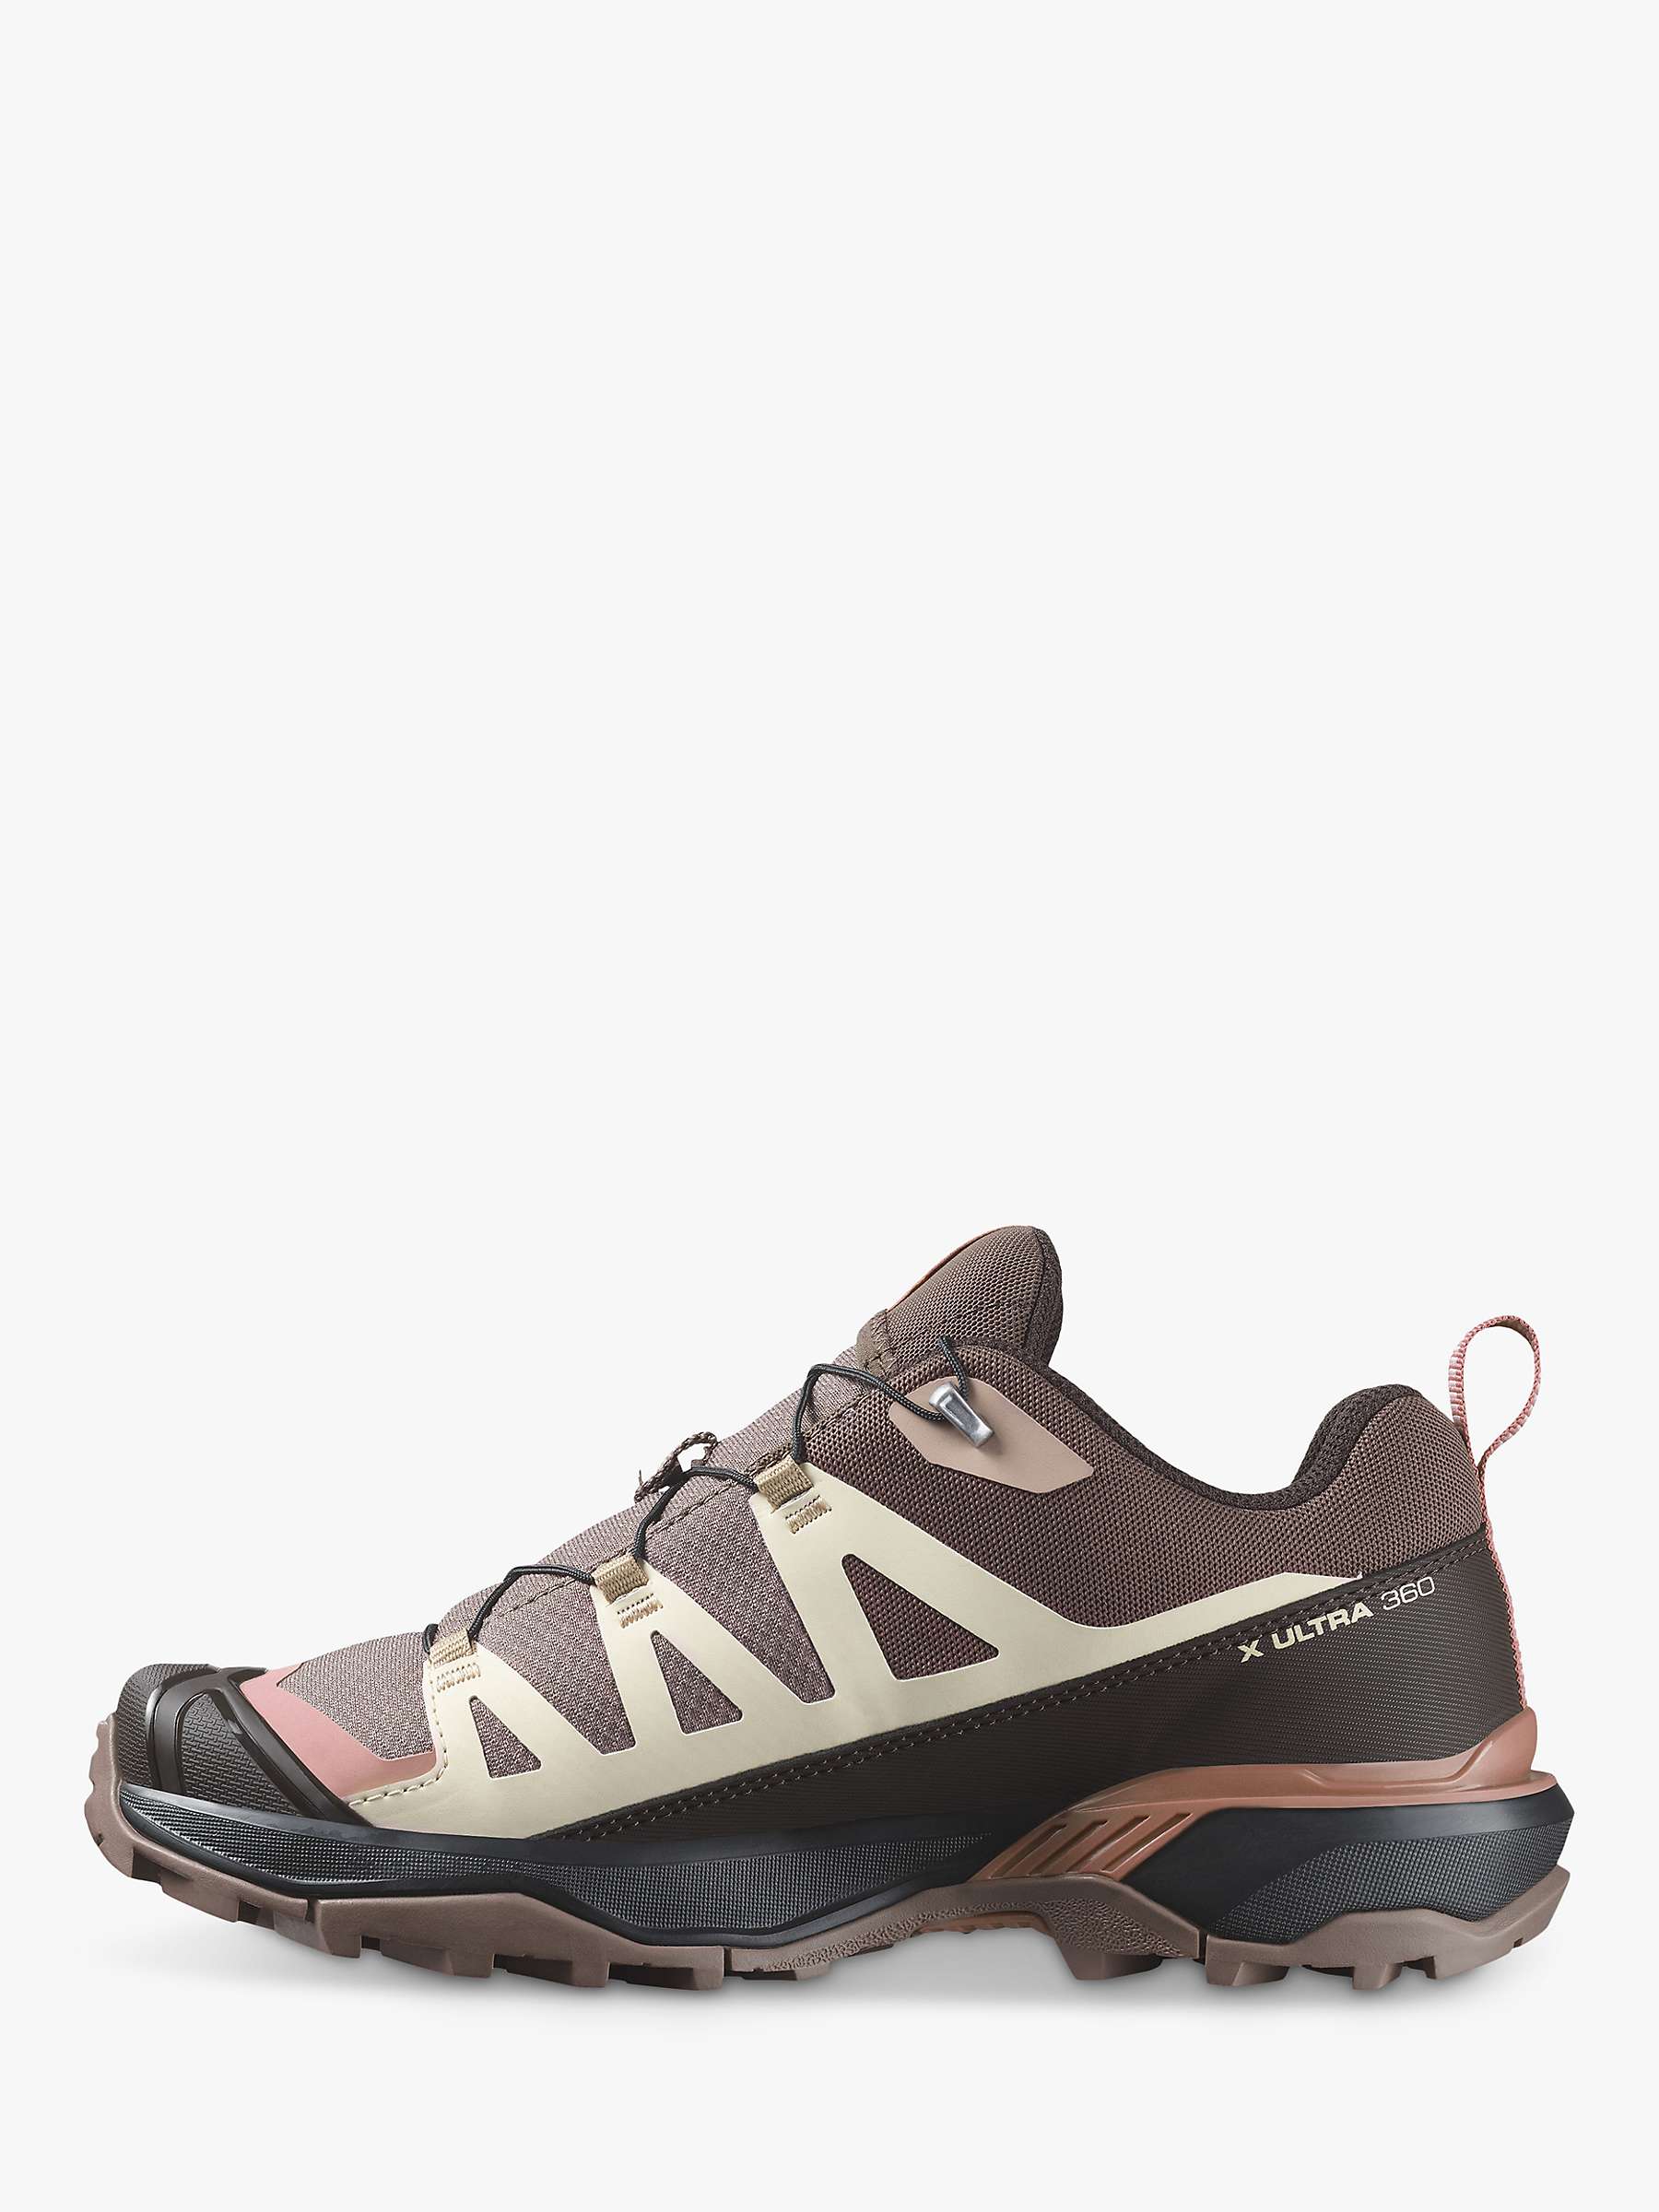 Buy Salomon X Ultra 360 Women's Sports Shoes, Deep Taupe/Neutral Online at johnlewis.com